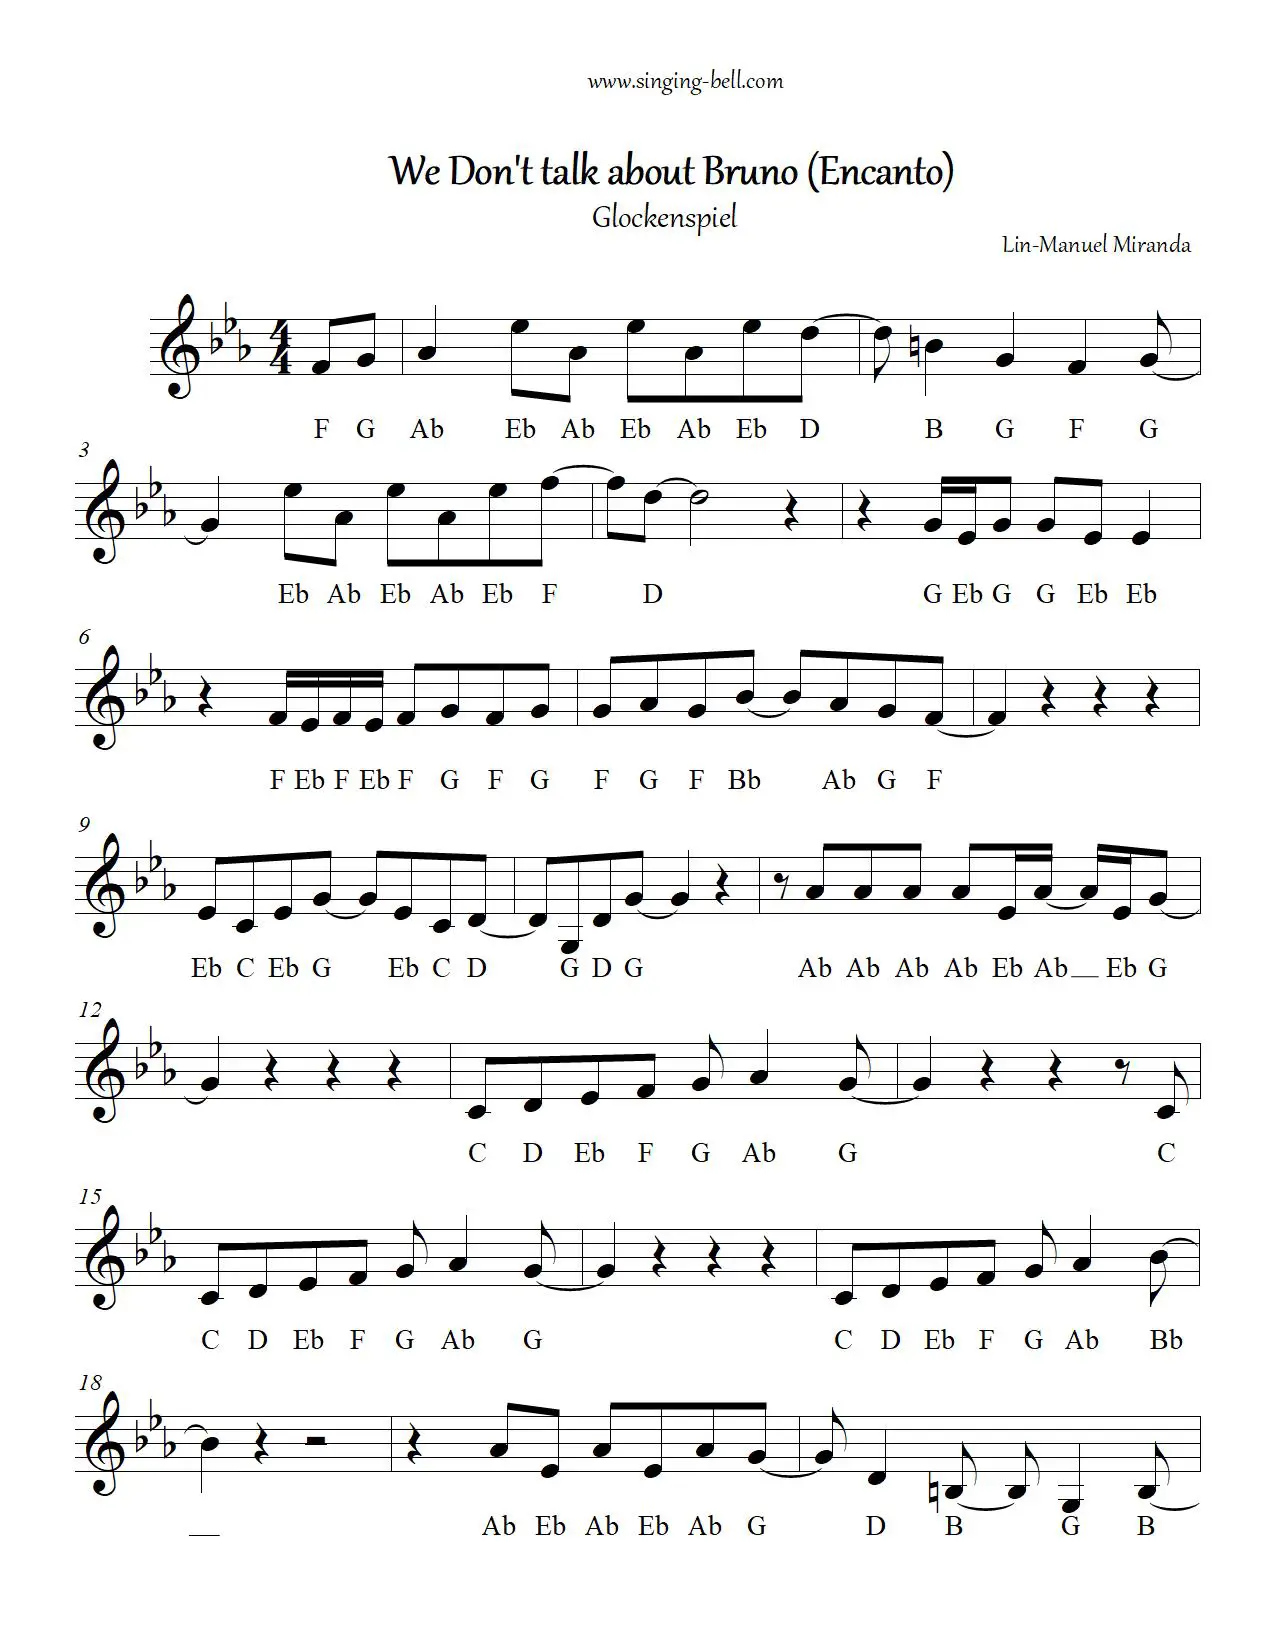 We Don't Talk About Bruno_1 free xylophone glockenspiel sheet music notes chart pdf